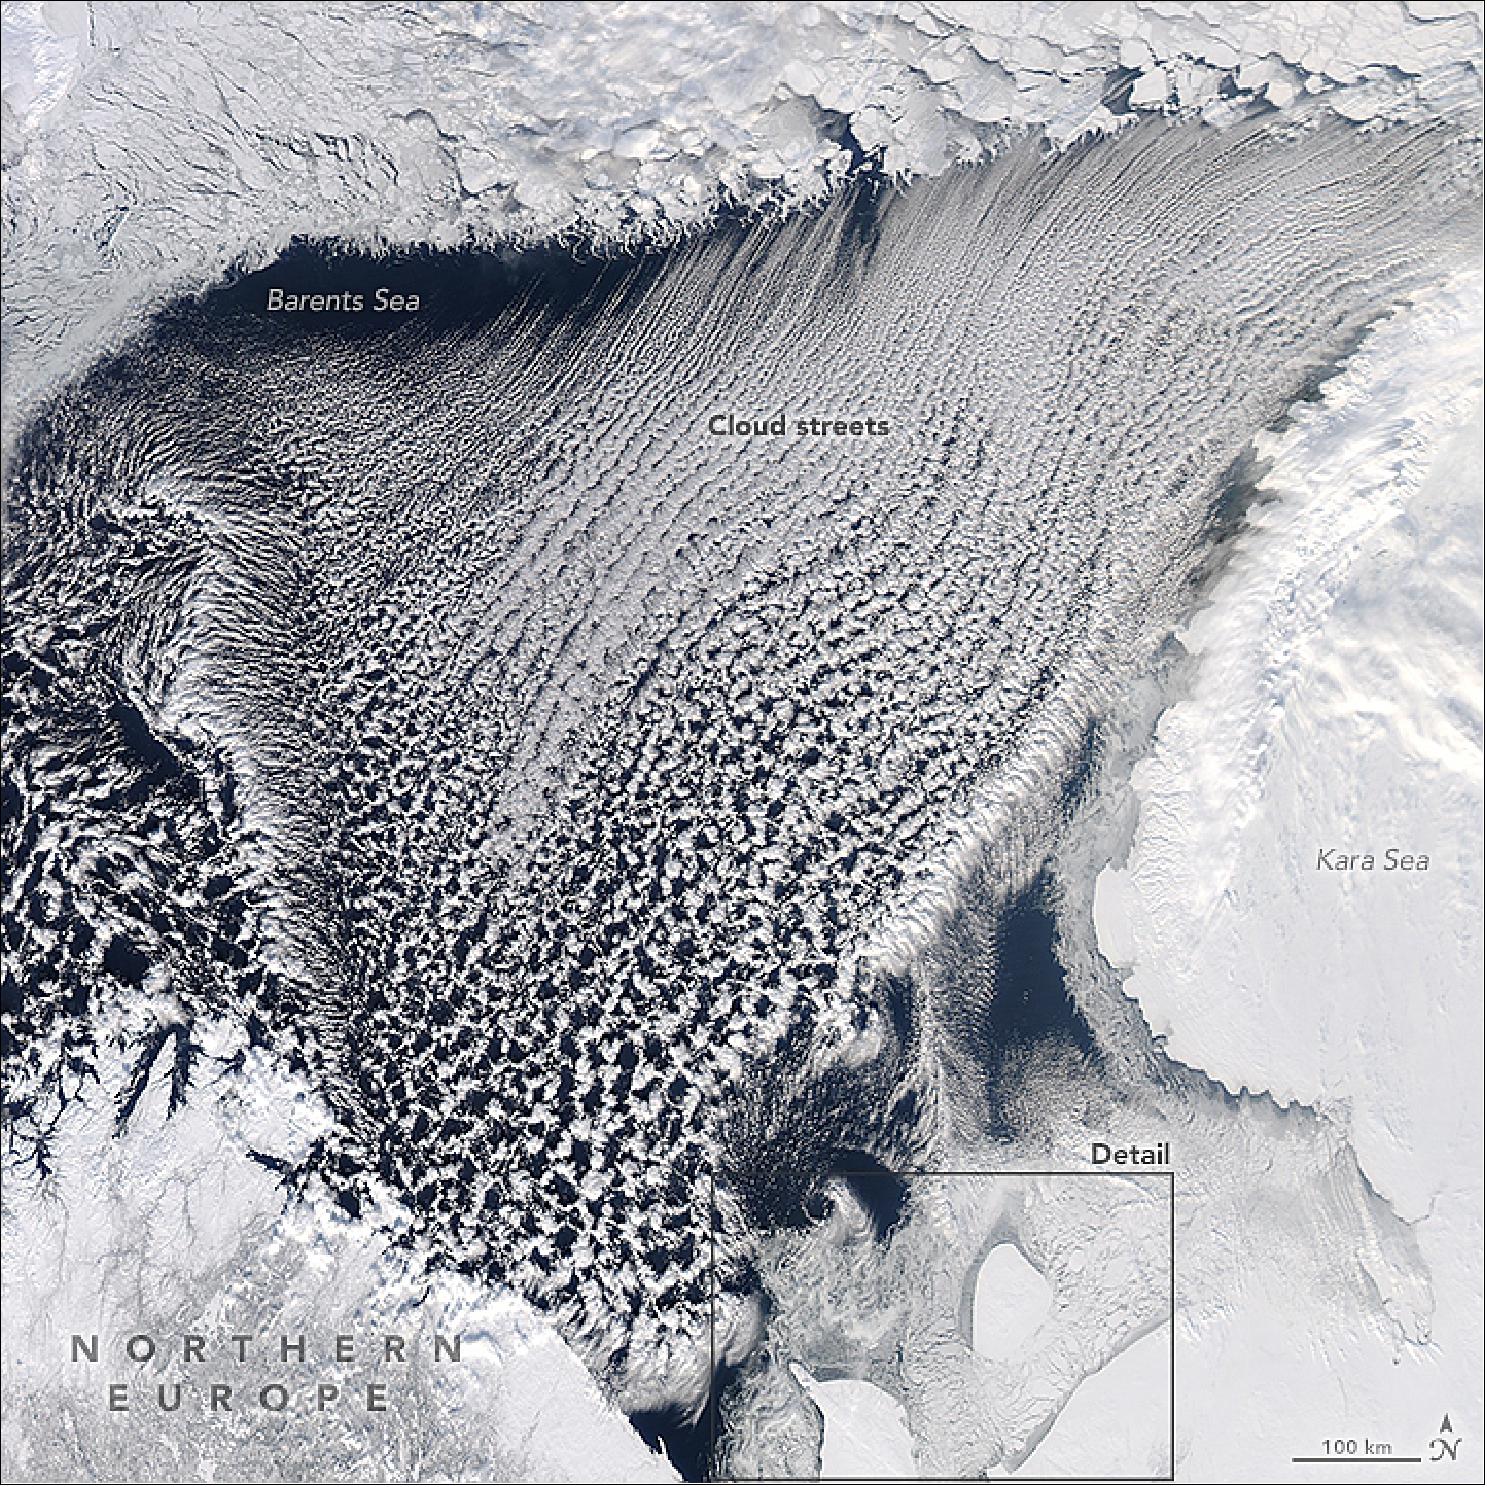 Figure 75: The MODIS instrument acquired this image of cloud streets over the Barents Sea on 15 March 2018 (image credit: NASA Earth Observatory, images by Jeff Schmaltz, using MODIS data from LANCE/EOSDIS Rapid Response, caption by Kathryn Hansen)